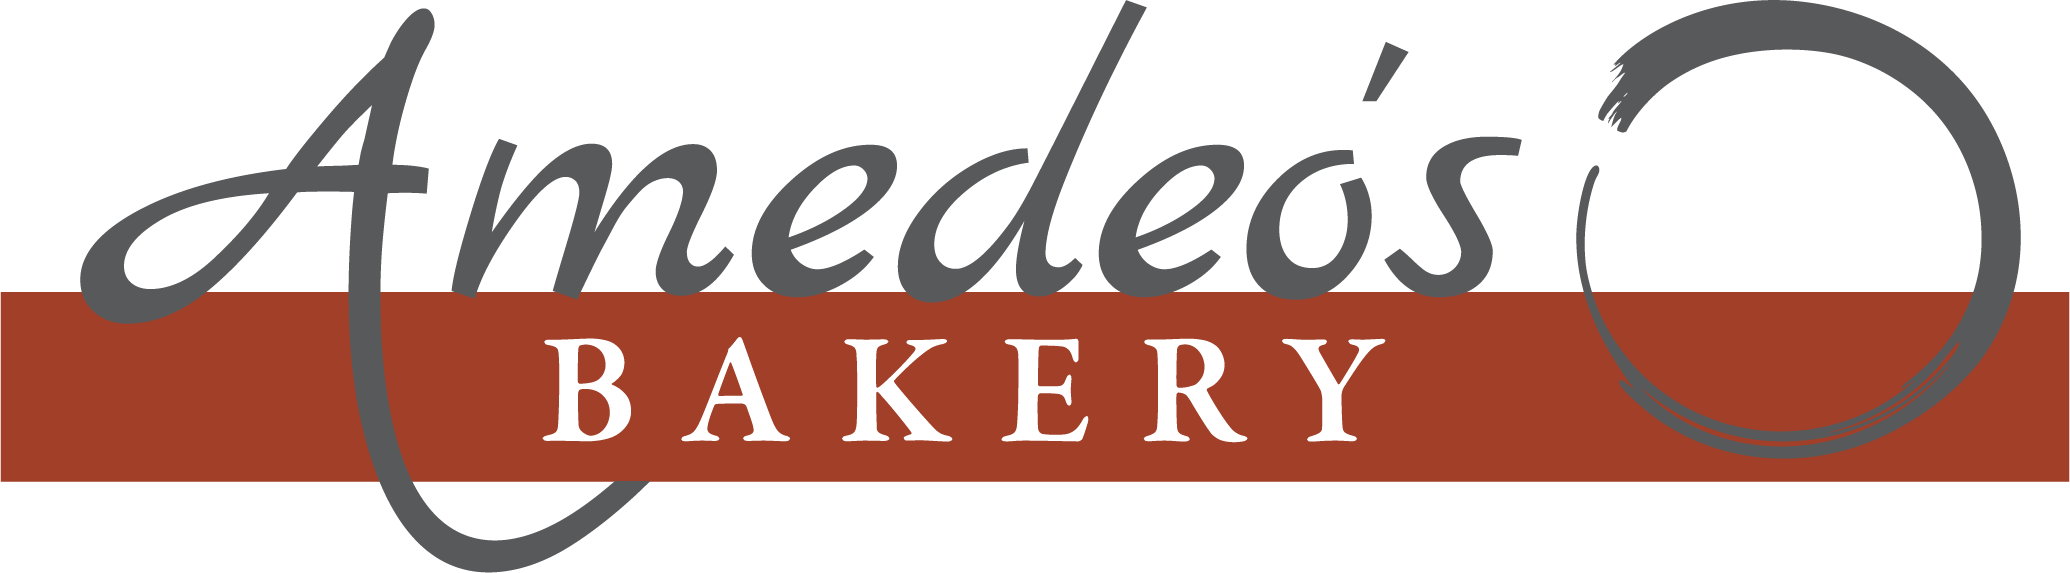 Amedeo's Bakery.png